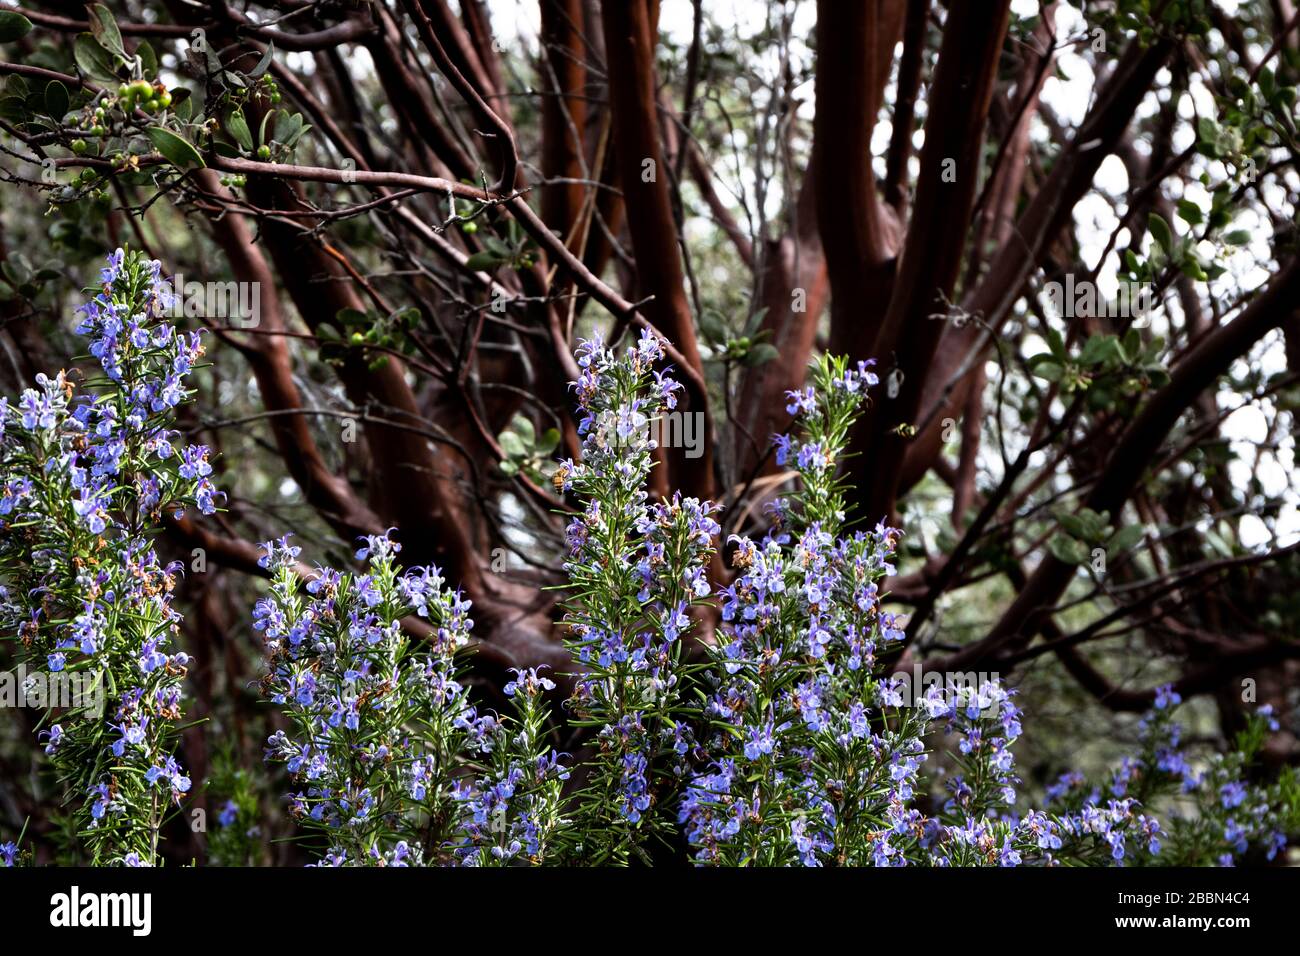 bright purple blue rosemary culinary and medicinal herb growing oustide, good springtime polinator for bees, manzinita tree in background Stock Photo